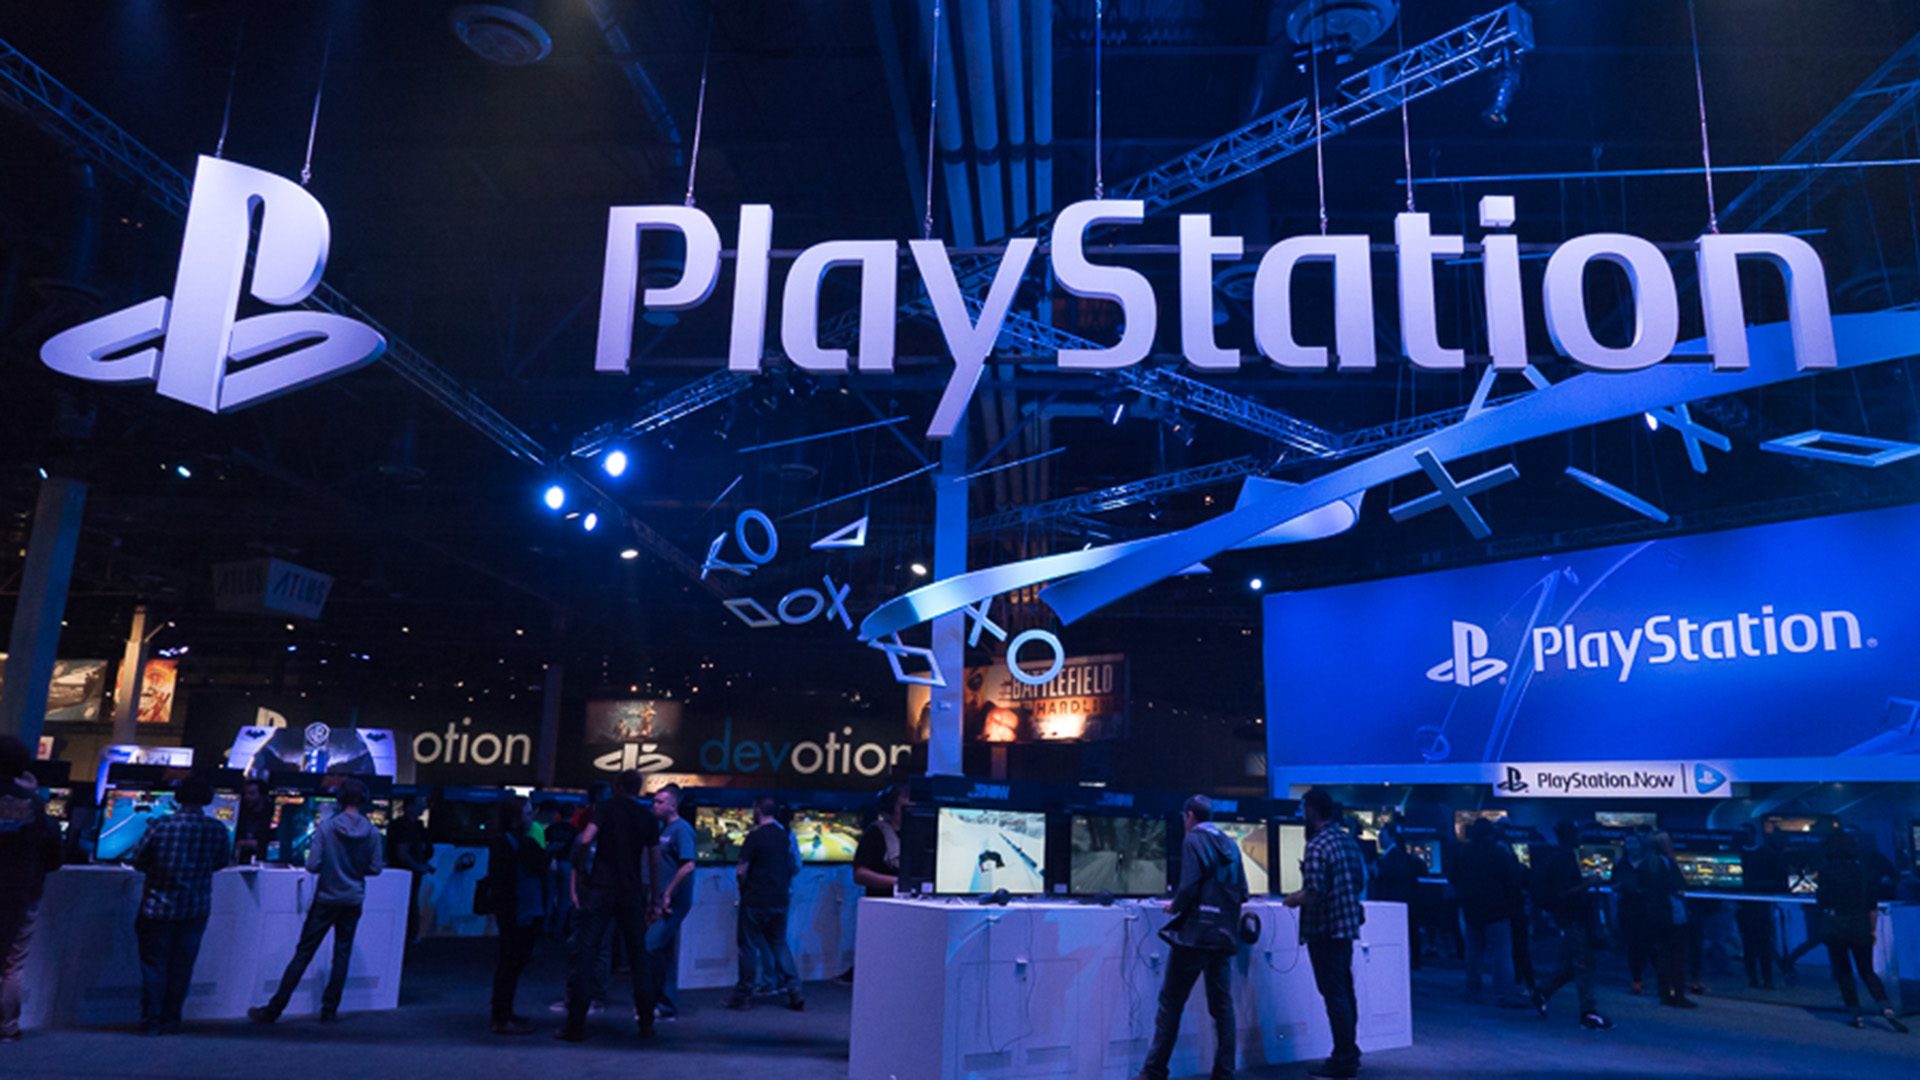 What Is Playstation Experience